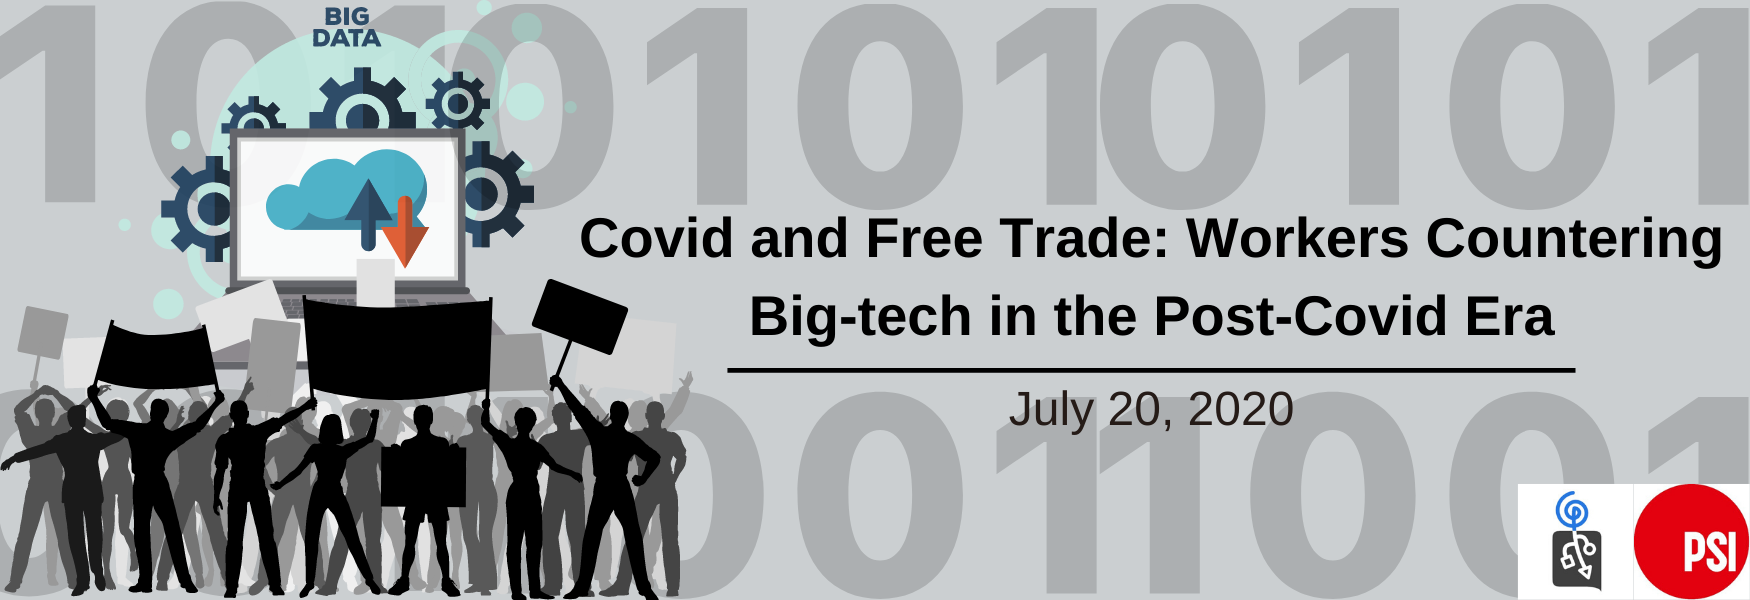 Covid and Free Trade: Workers Countering Big-Tech in the Post-Covid Era